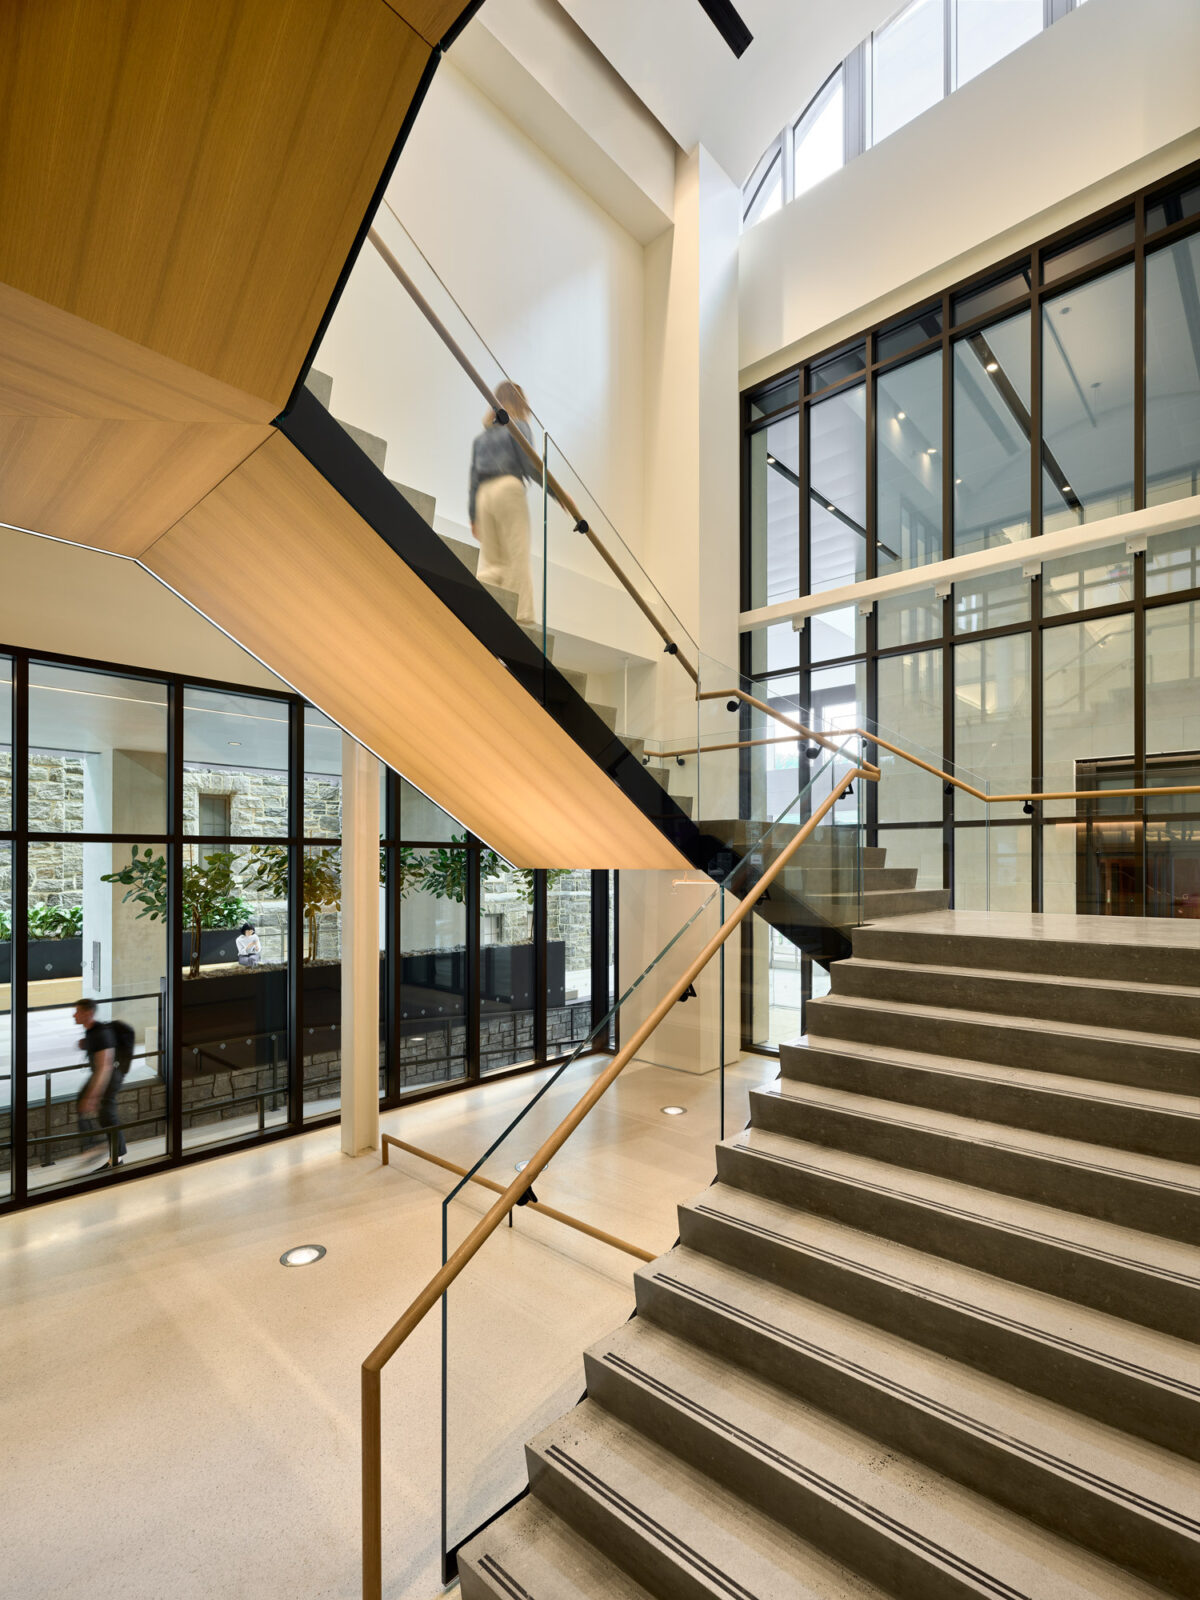 Modern interior showcasing a floating wooden staircase with glass balustrades, enhancing natural light flow from floor-to-ceiling windows, complemented by minimalist design lines and a neutral color palette.